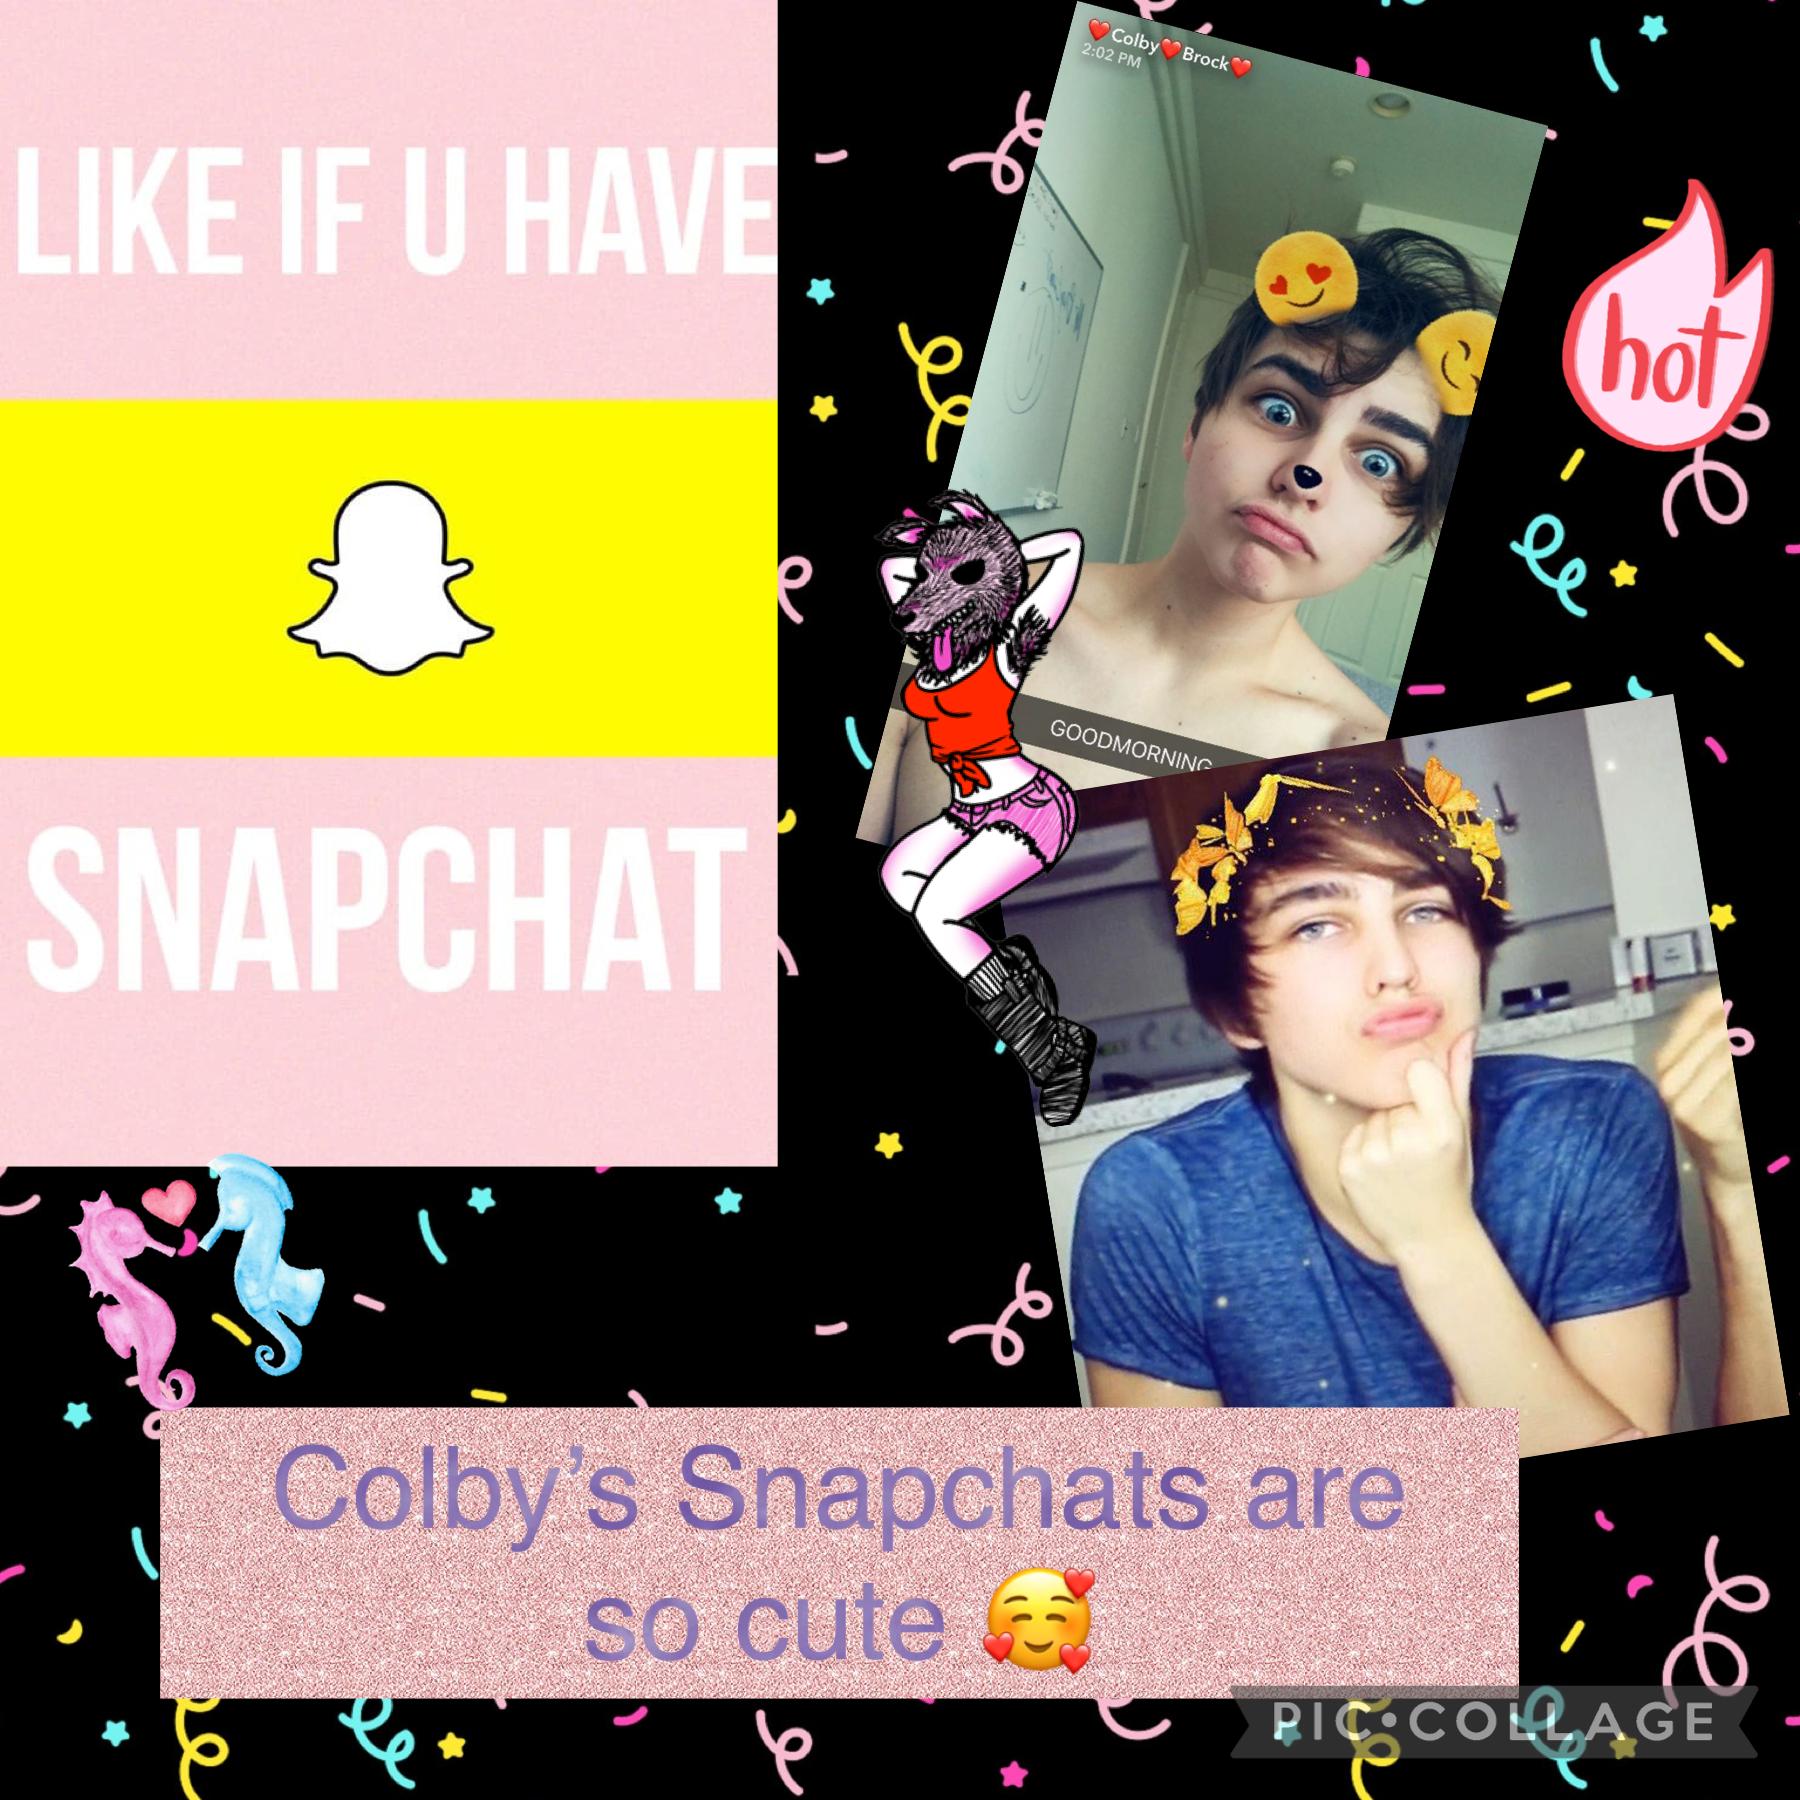 Colby’s Snapchats are so so cute lol!!!he does the cutest pics ever